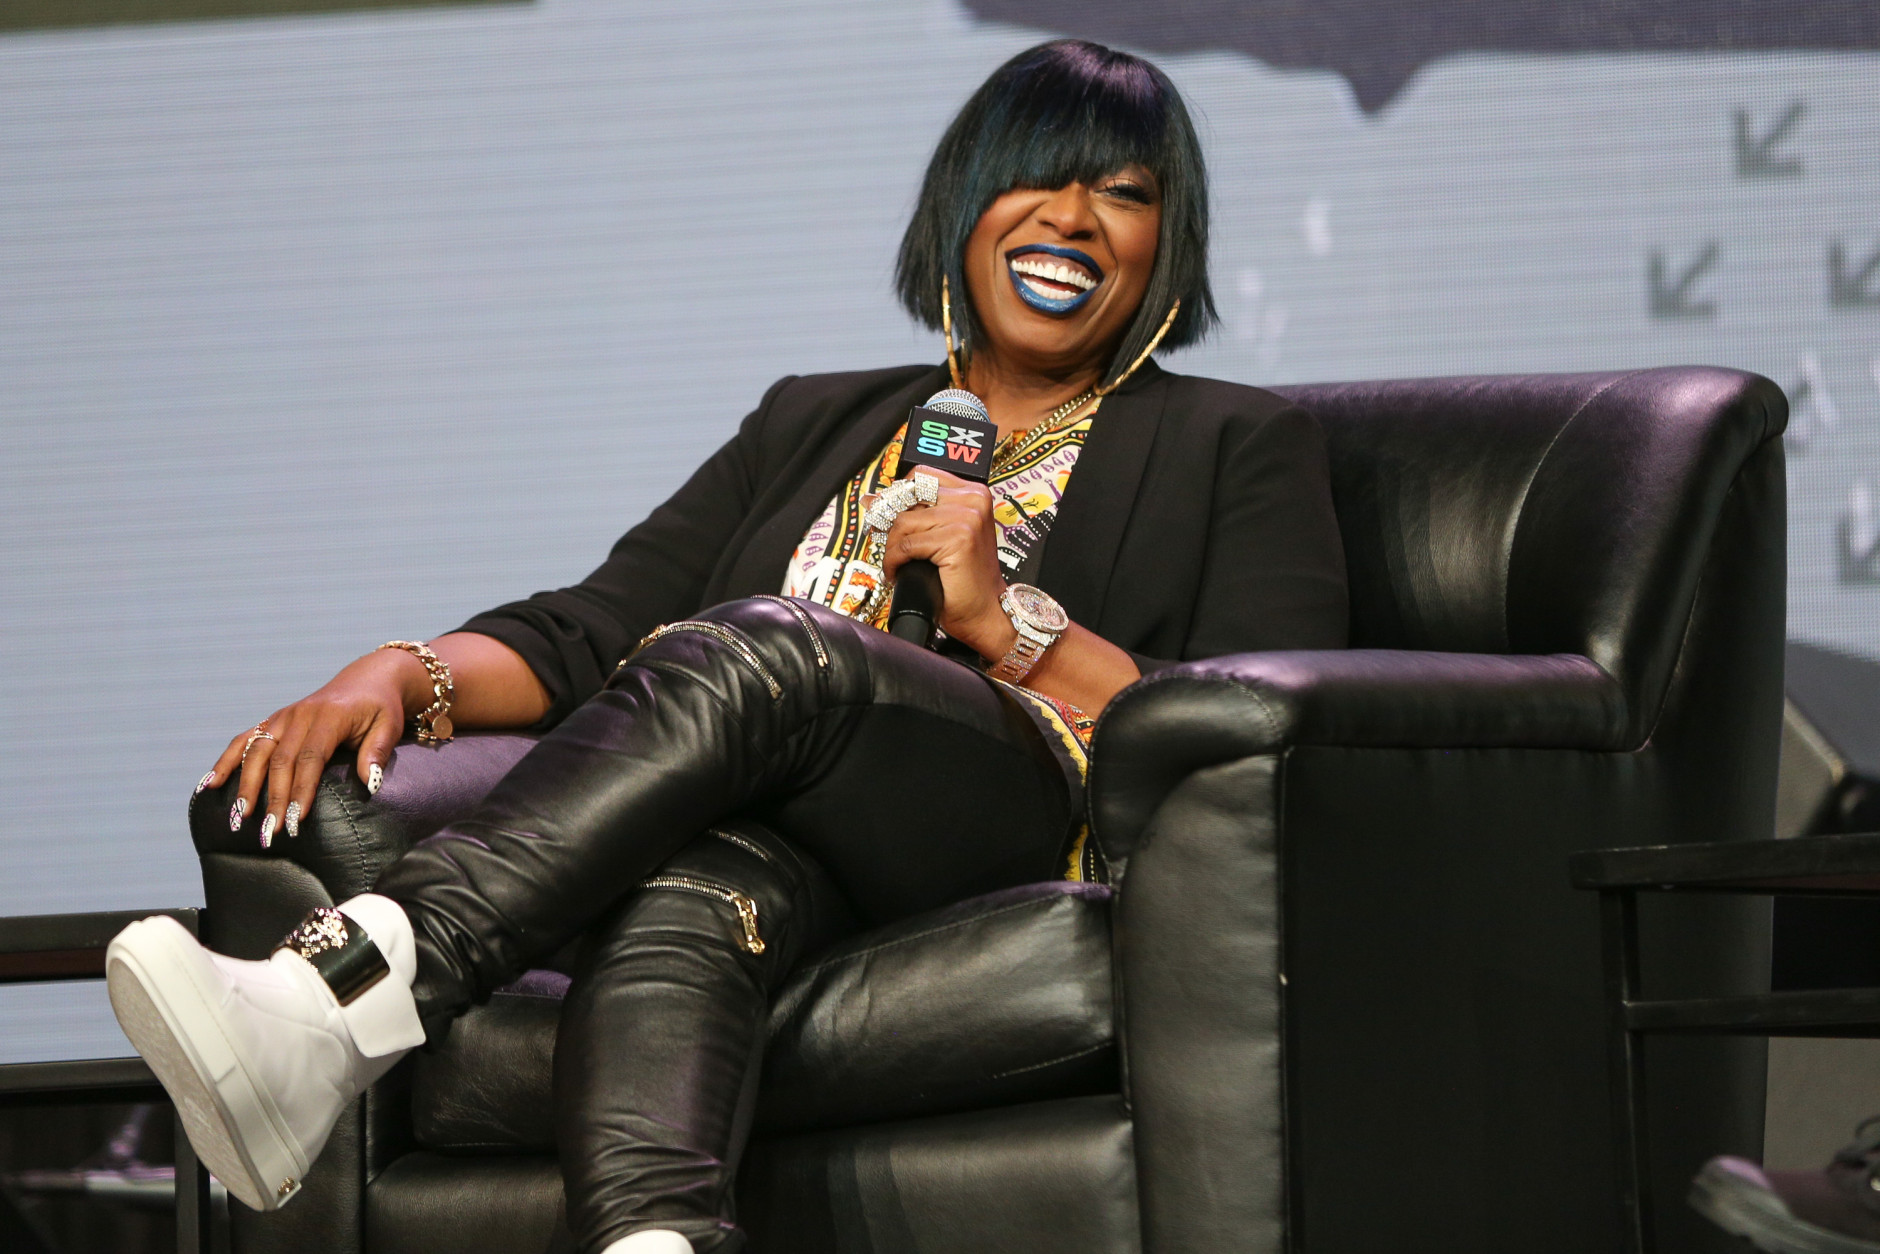 Missy Elliott appears at a panel discussion during South By Southwest at the Austin Convention Center on Wednesday, March 16, 2016, in Austin, Texas. (Photo by Rich Fury/Invision/AP)